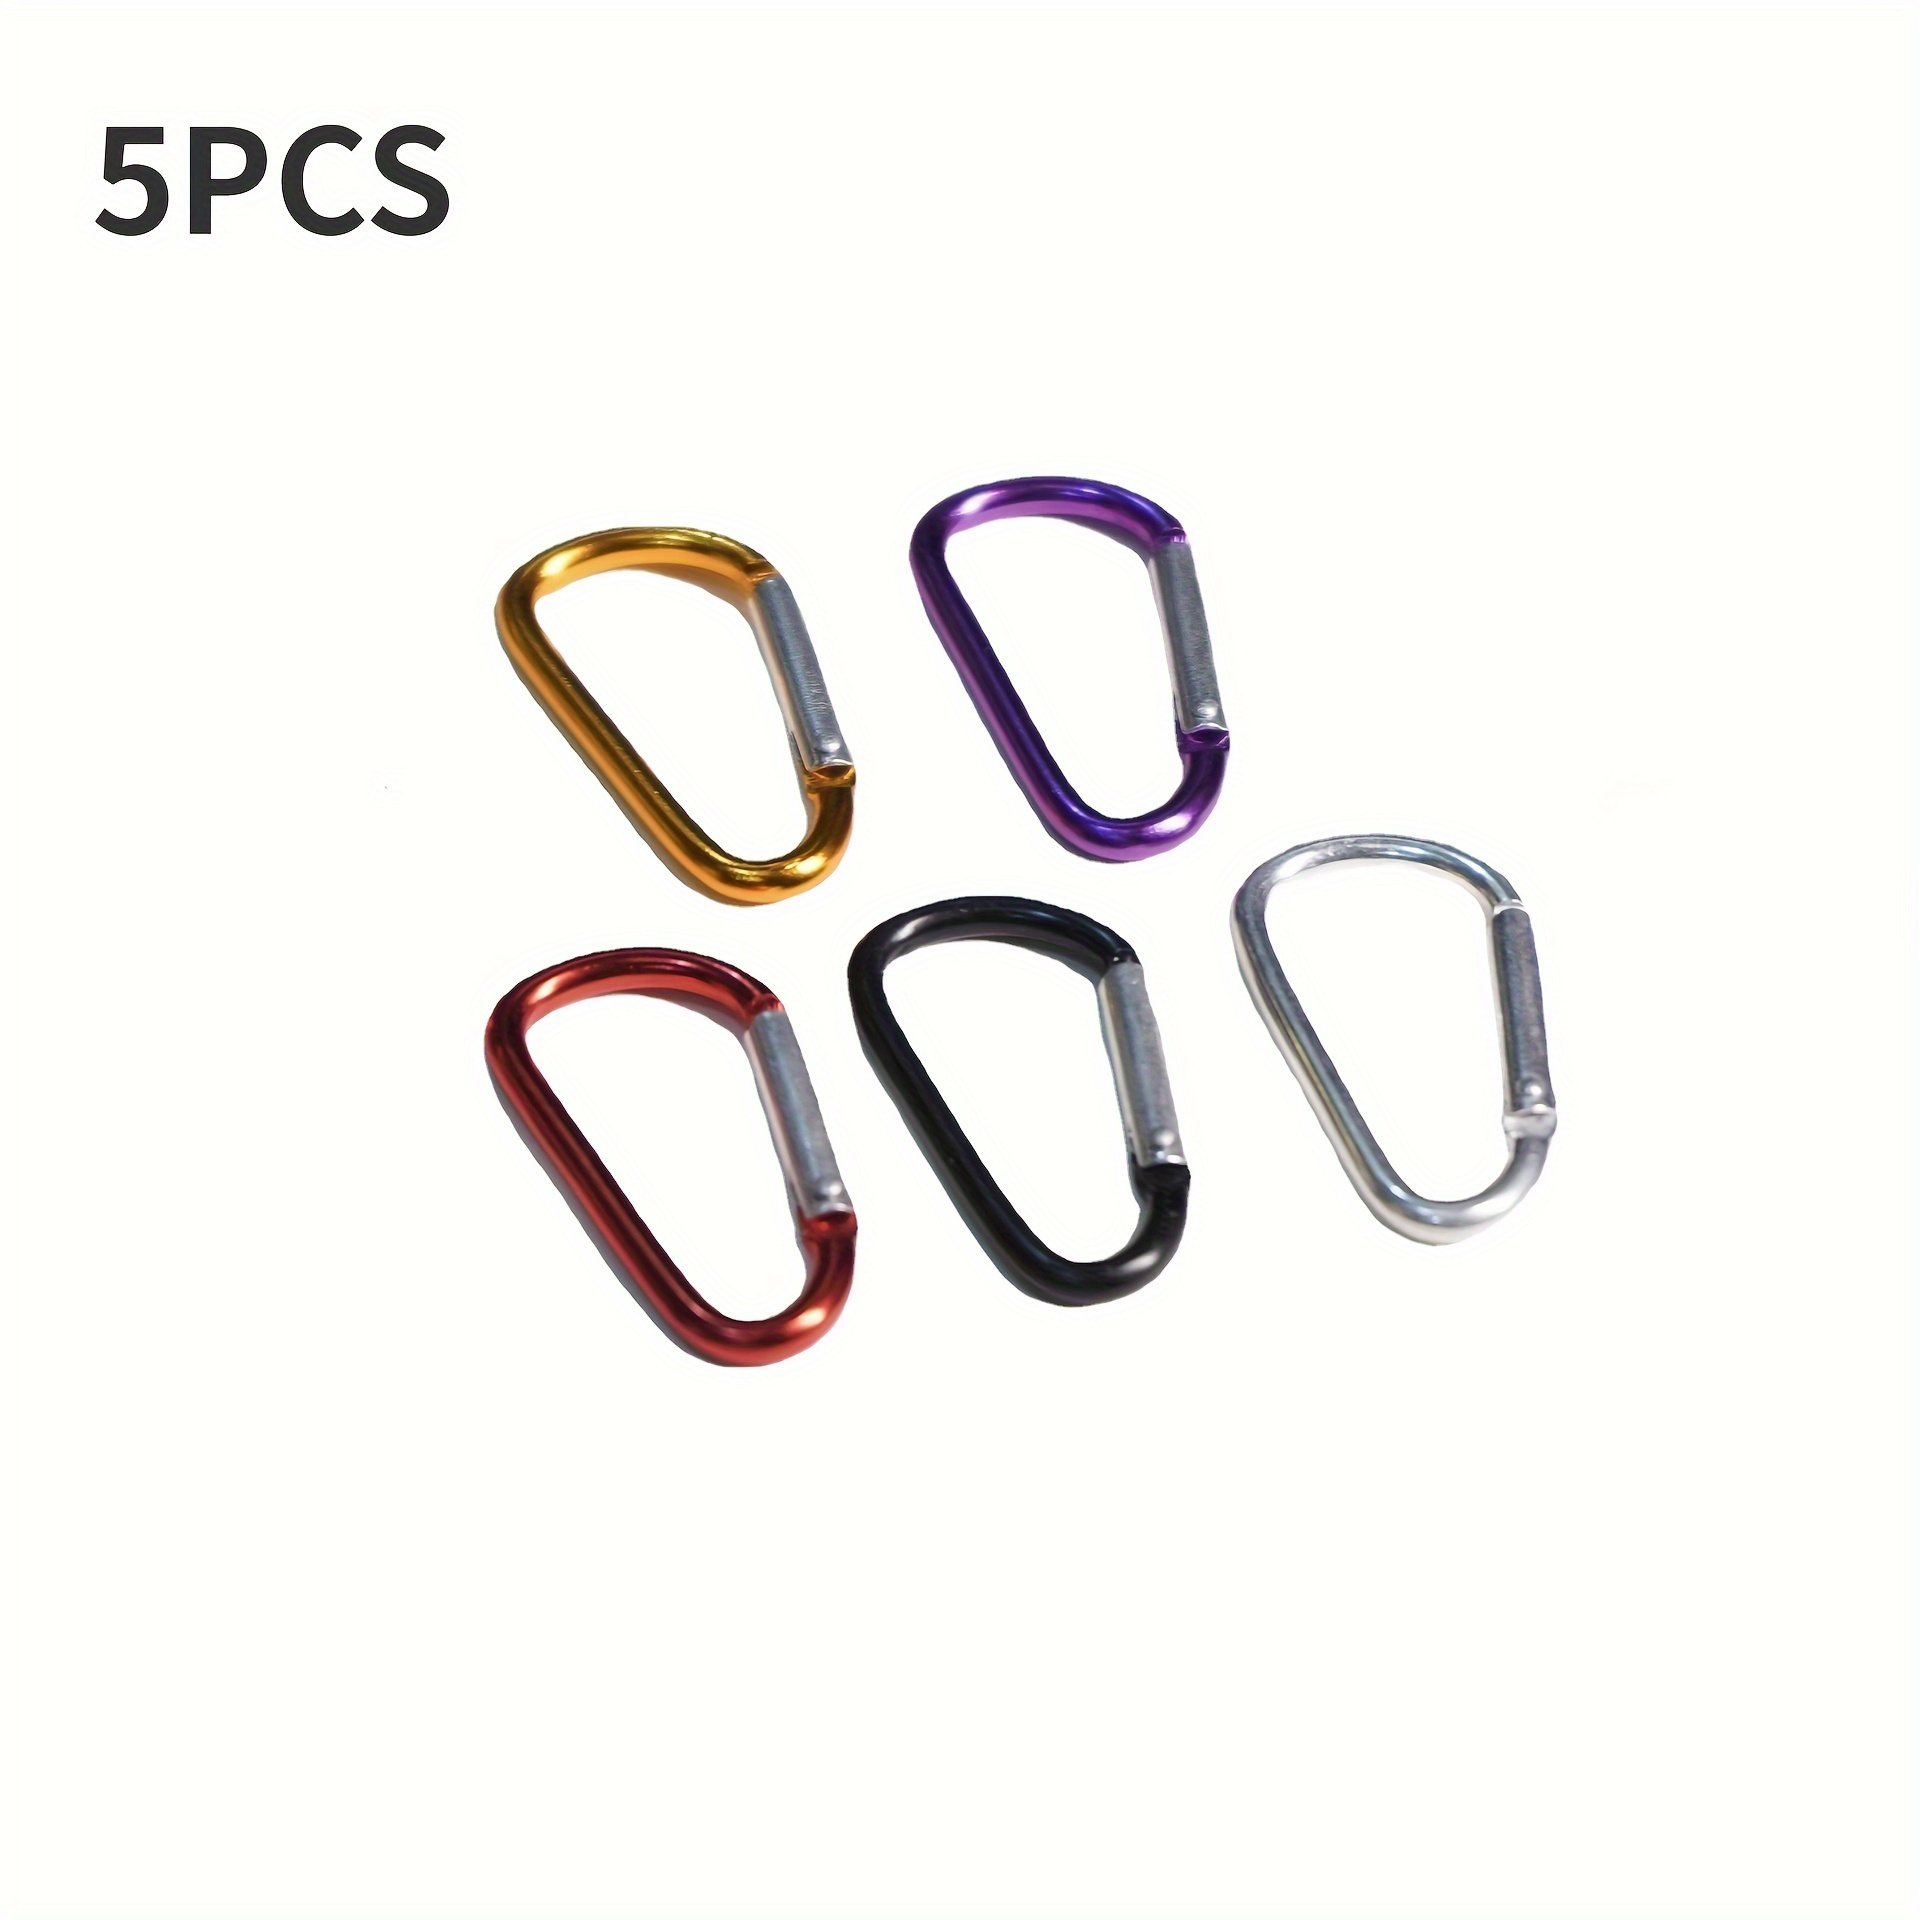 5pcs D Shaped Buckle Keychain Clip Spring Snap Hook Key Chain Keyring For  Camping Hiking And Travel, Check Out Today's Deals Now